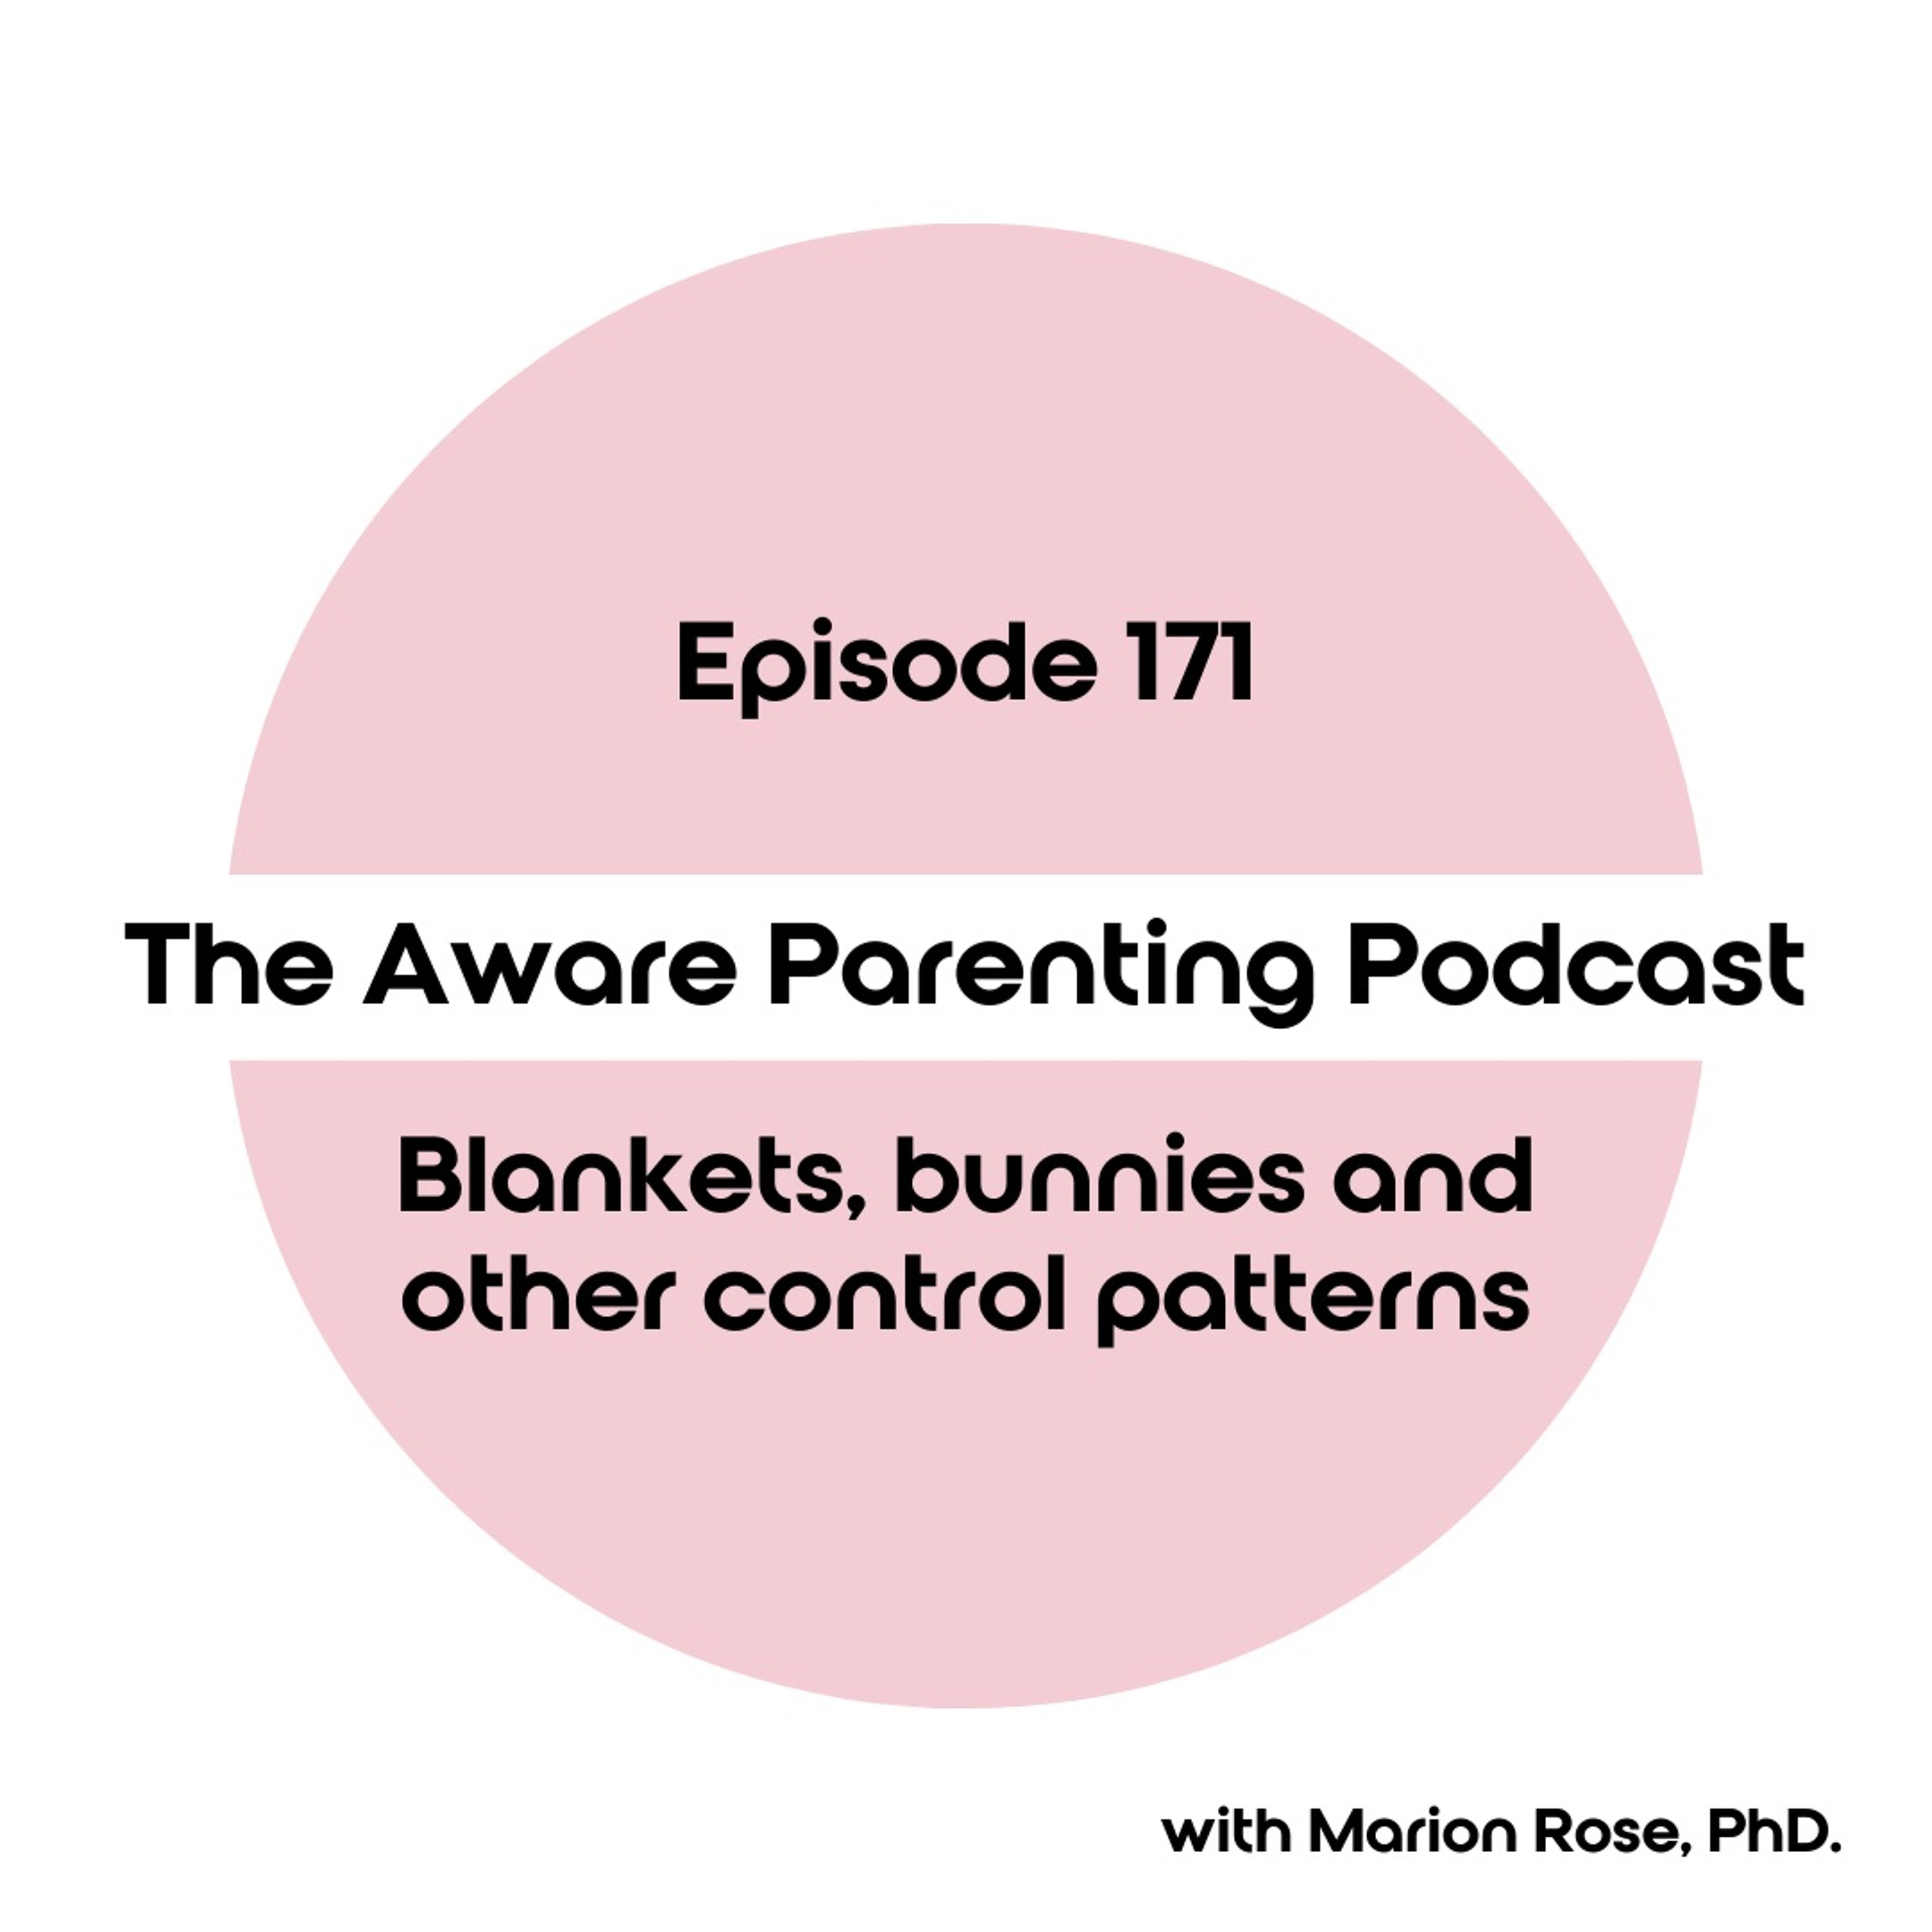 Episode 171: Blankets, bunnies and other control patterns